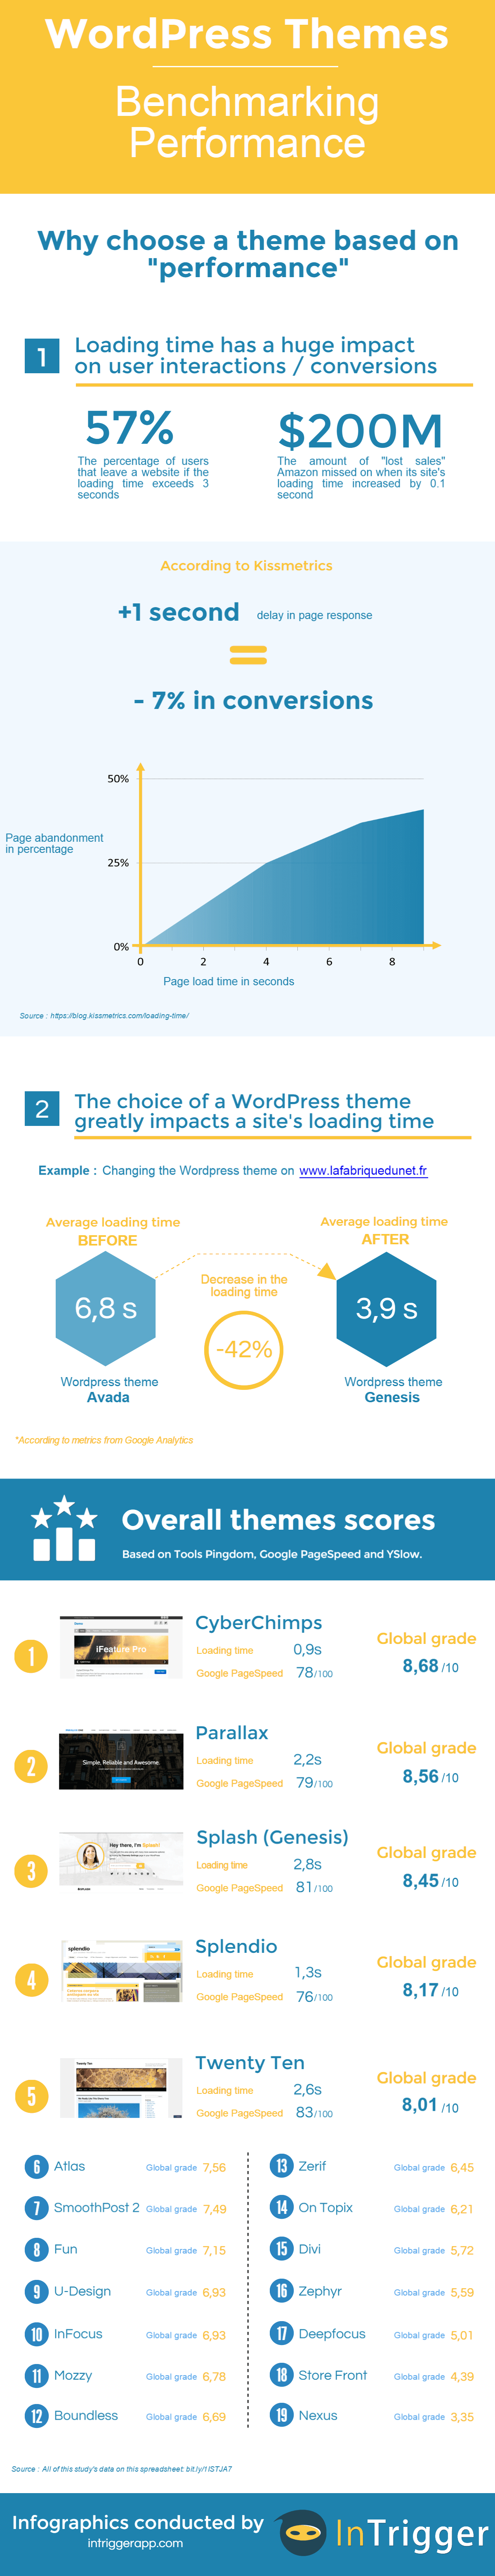 Impact of a WordPress Themes on Performance and average page load time